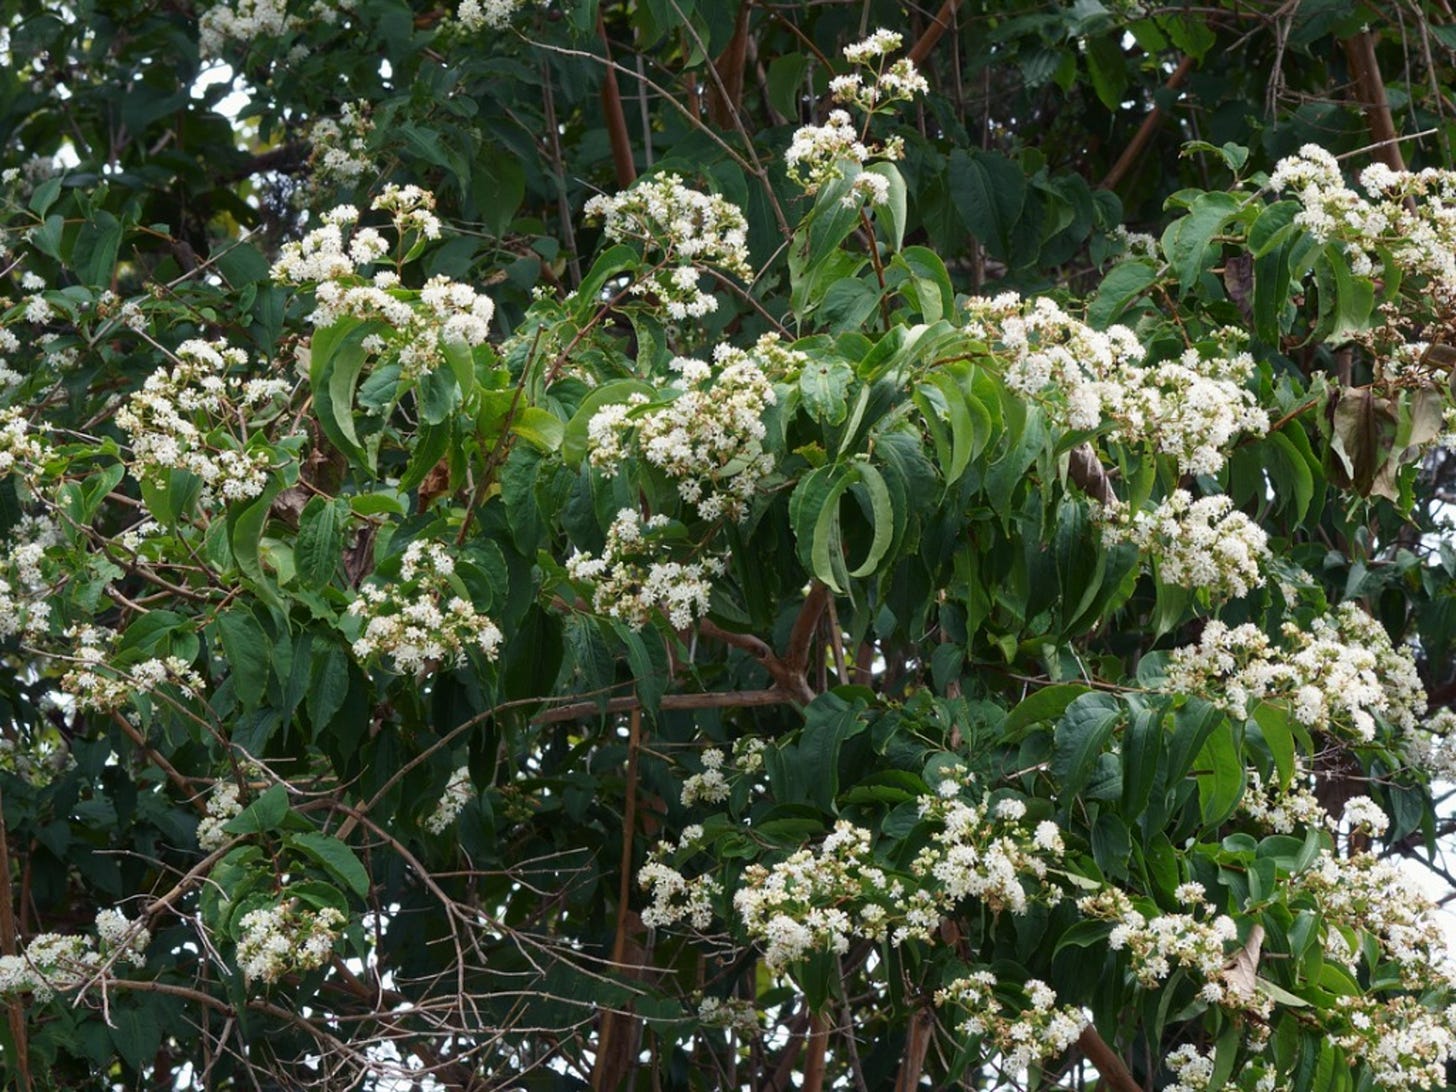 Heptacodium Seven Son Care: Tips For Growing Seven Son Trees